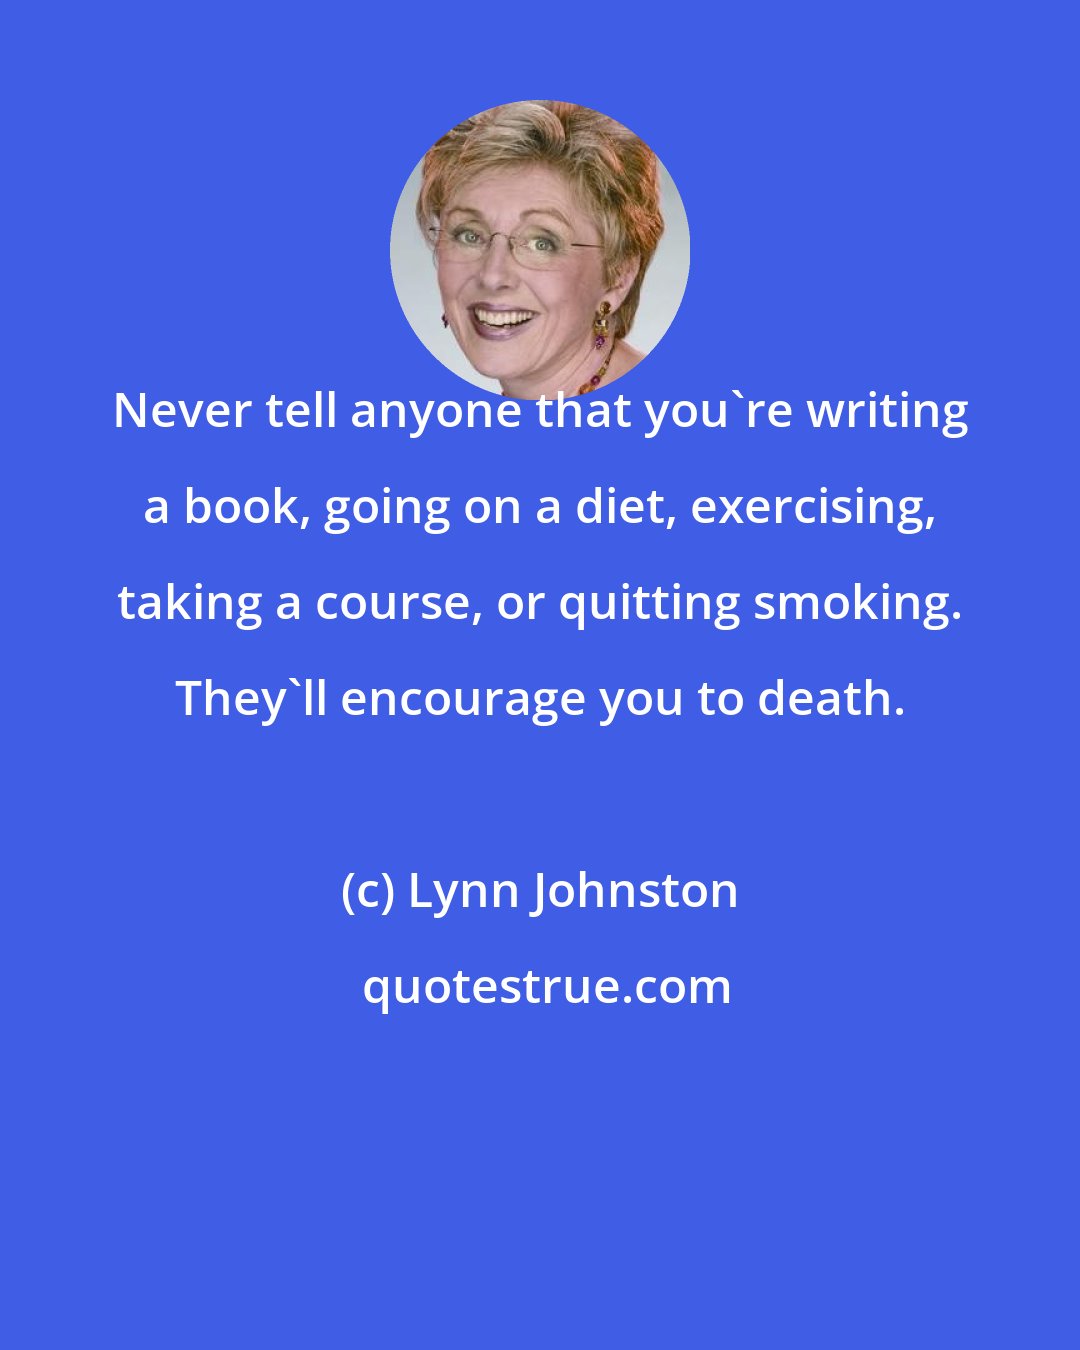 Lynn Johnston: Never tell anyone that you're writing a book, going on a diet, exercising, taking a course, or quitting smoking. They'll encourage you to death.